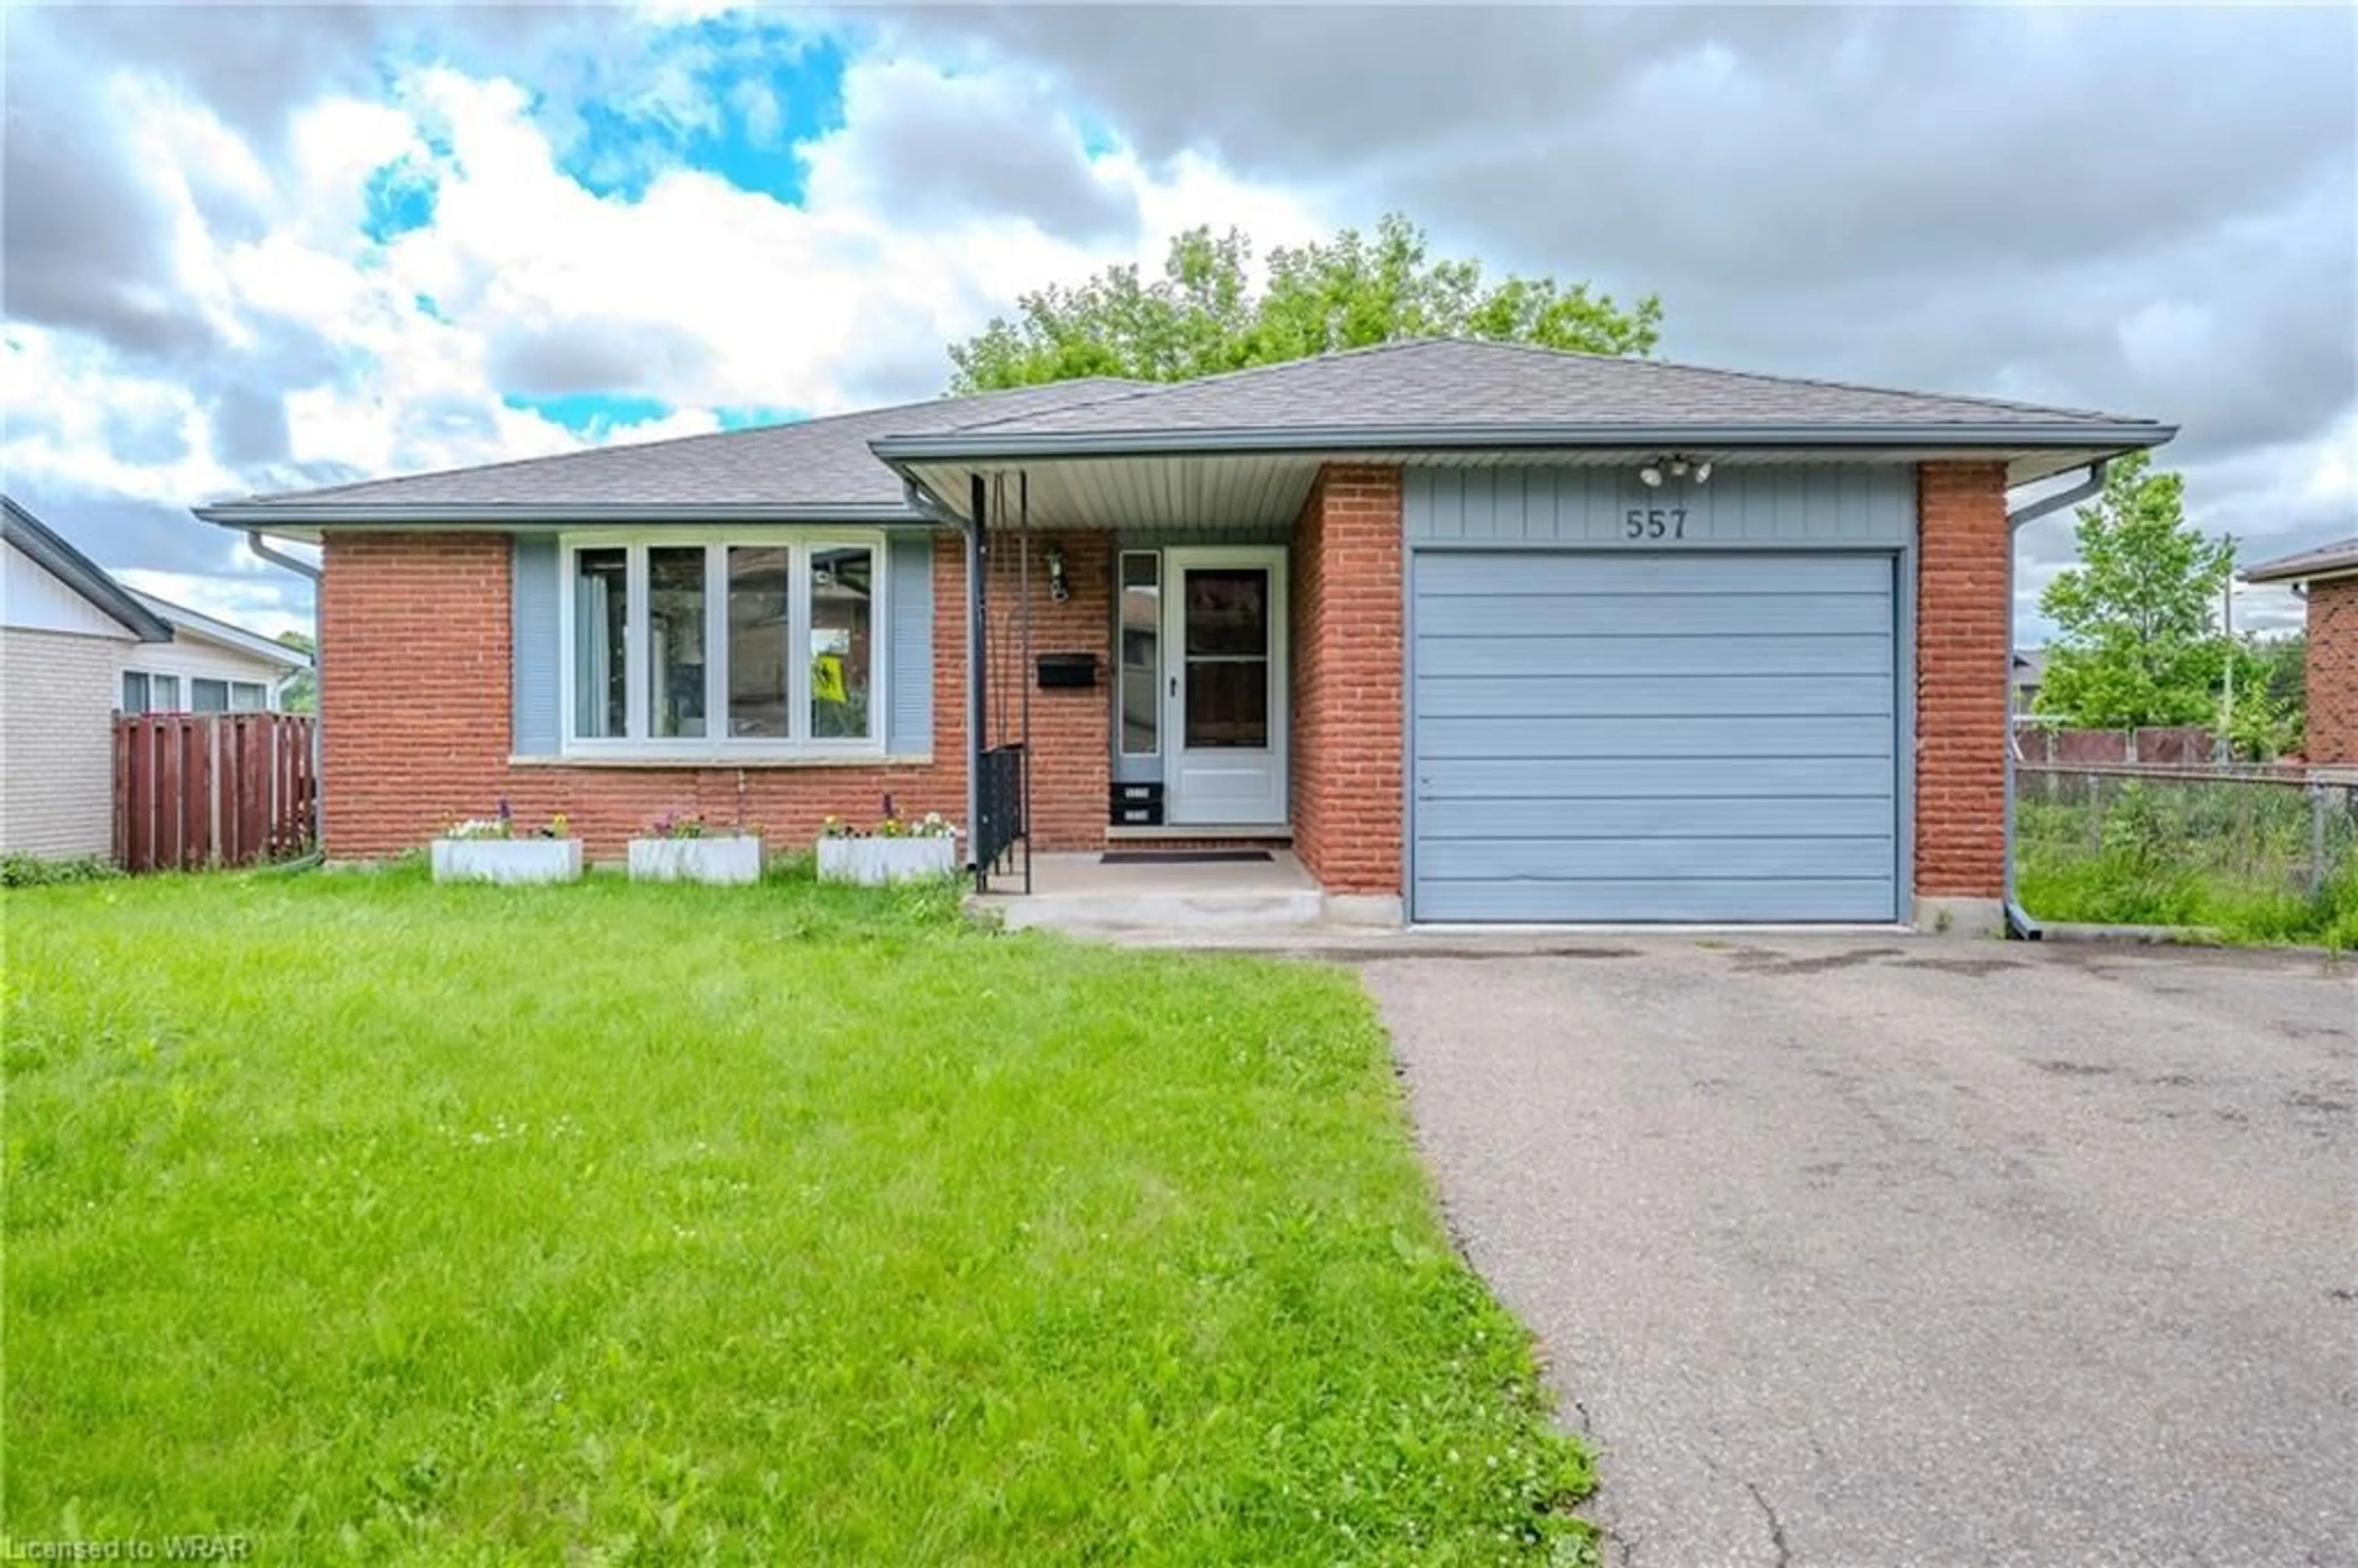 Home with brick exterior material for 557 Havelock Dr, Waterloo Ontario N2L 4Z1